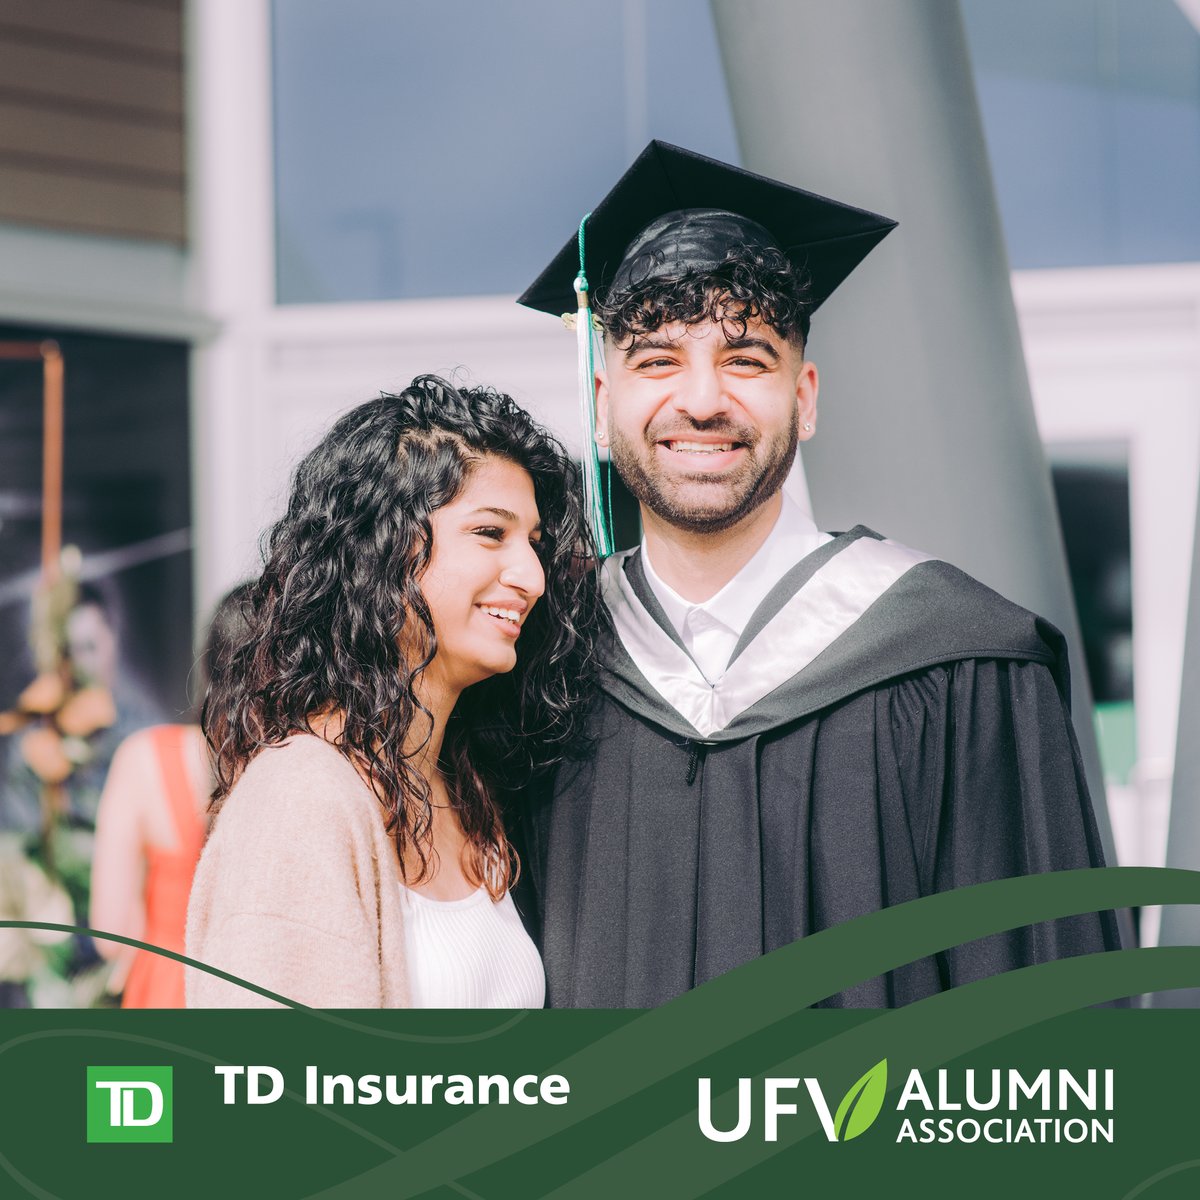 We want to express our immense gratitude to our sponsors @TD_Insurance and @UFVAlumni for your incredible contributions. Thanks to your generous donations the Alumni Celebration Plaza for our 2023 convocation is now a reality.

Cheers to making dreams come true! #UFVConvo🎉🎓